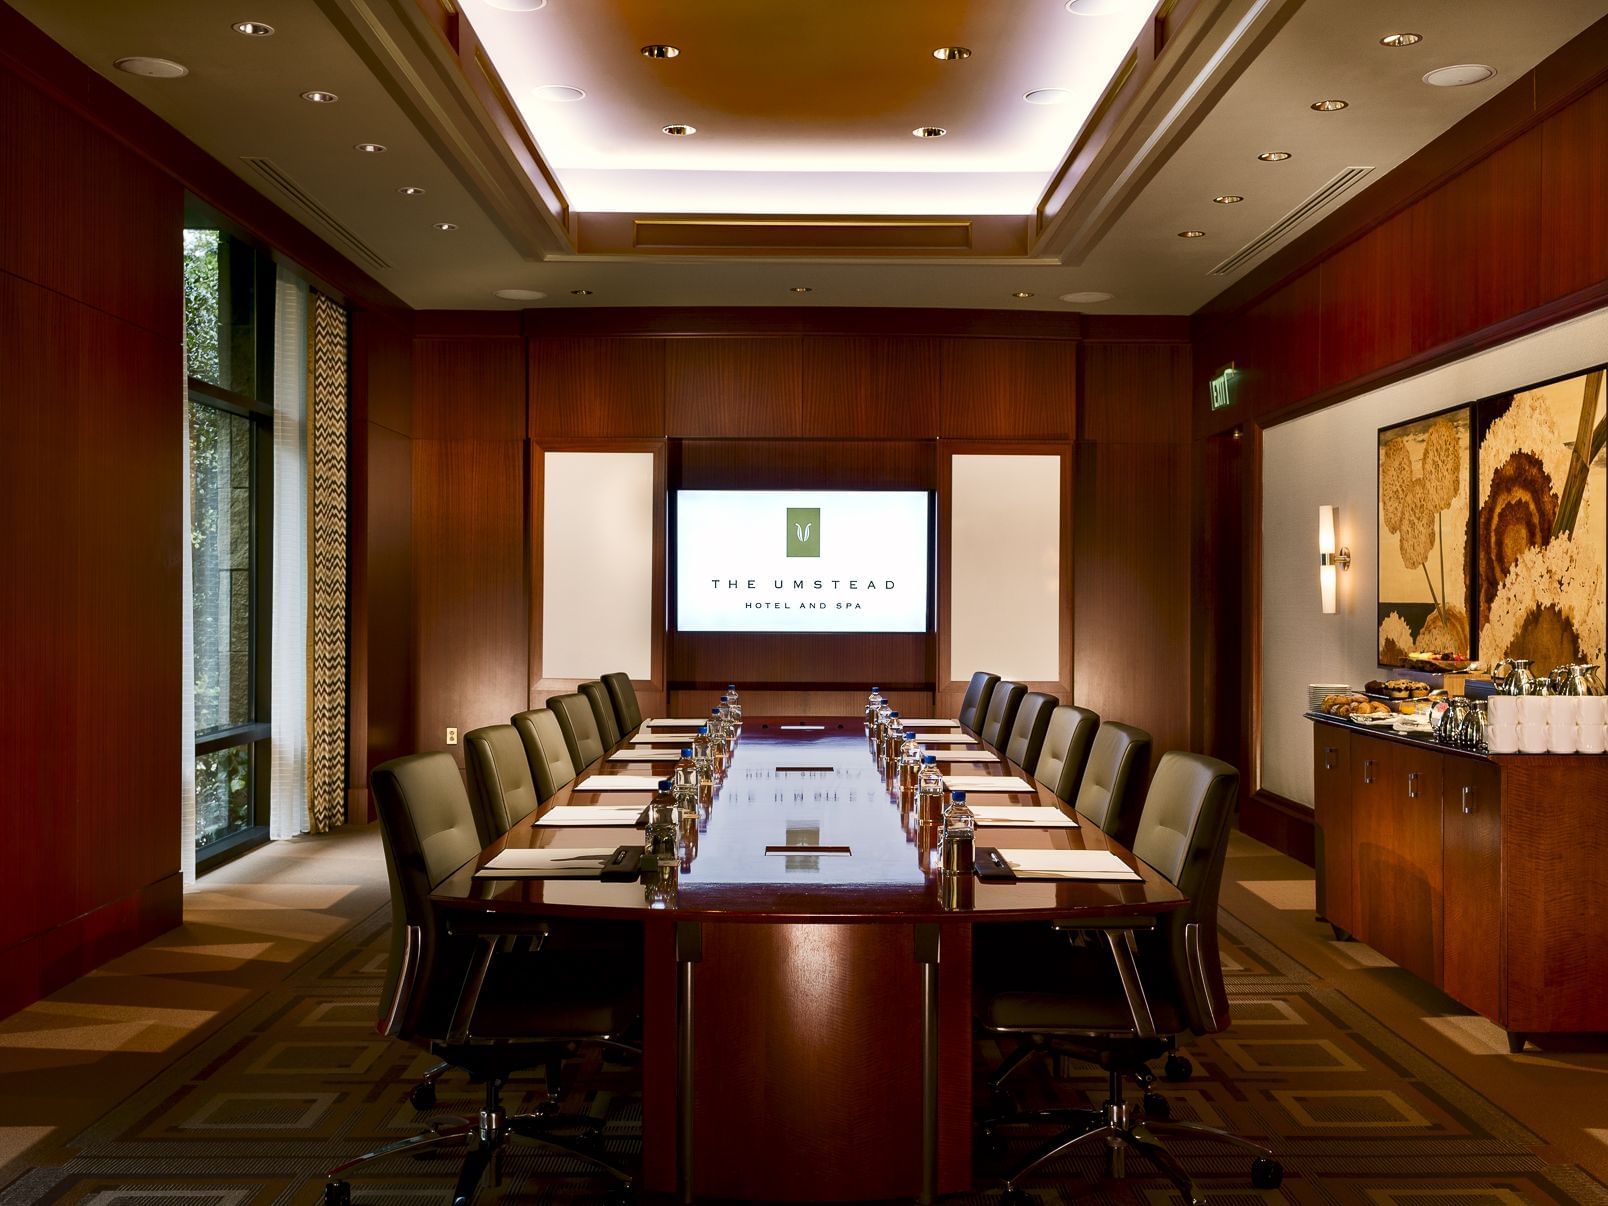 Boardroom-style table set up with a screen in the Ballroom at Umstead Hotel and Spa